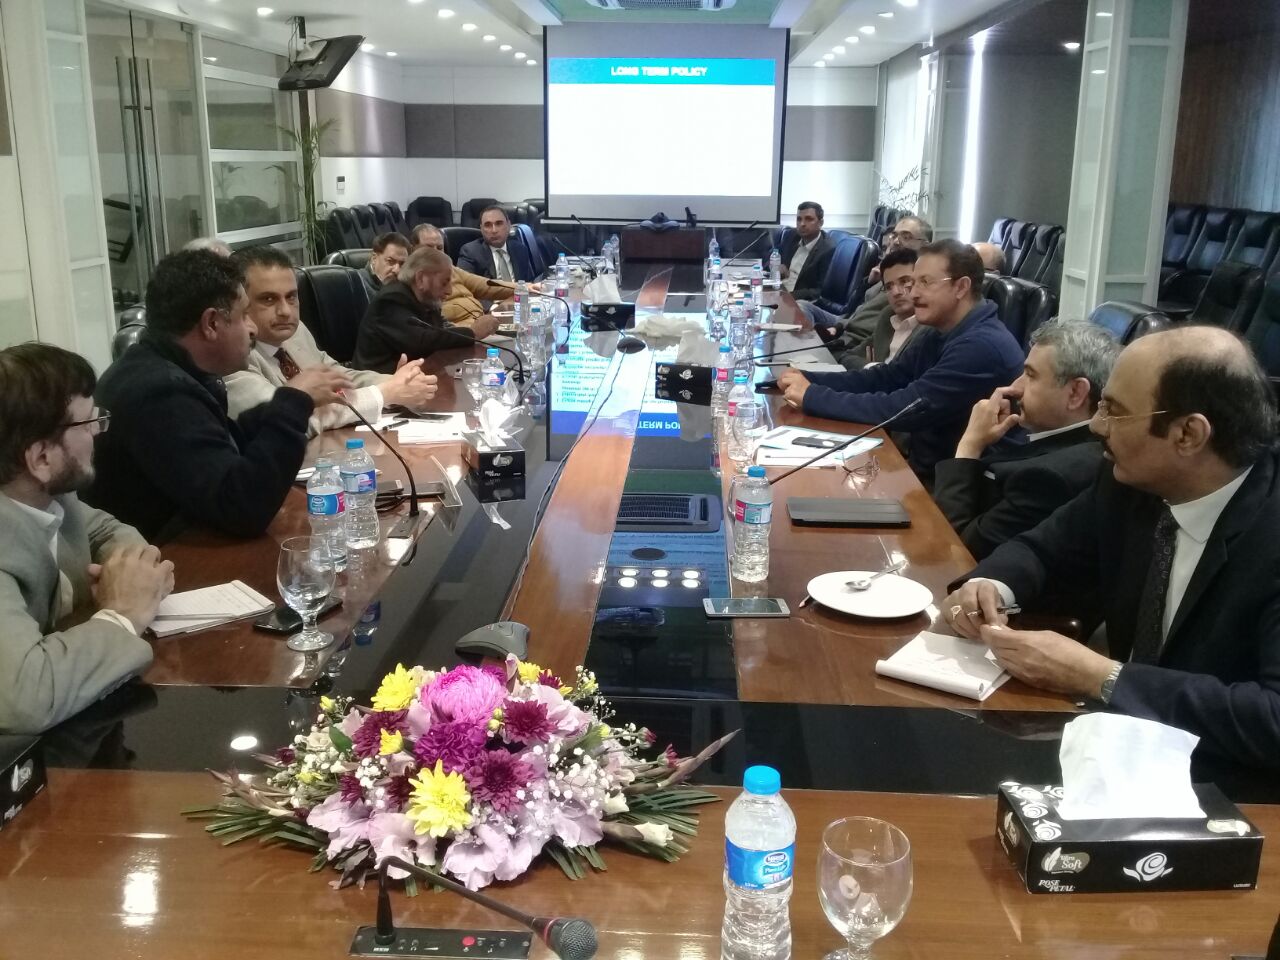 https://aptma.org.pk/wp-content/uploads/2021/10/Meeting-of-the-Textile-Industry-Associations-12.jpg